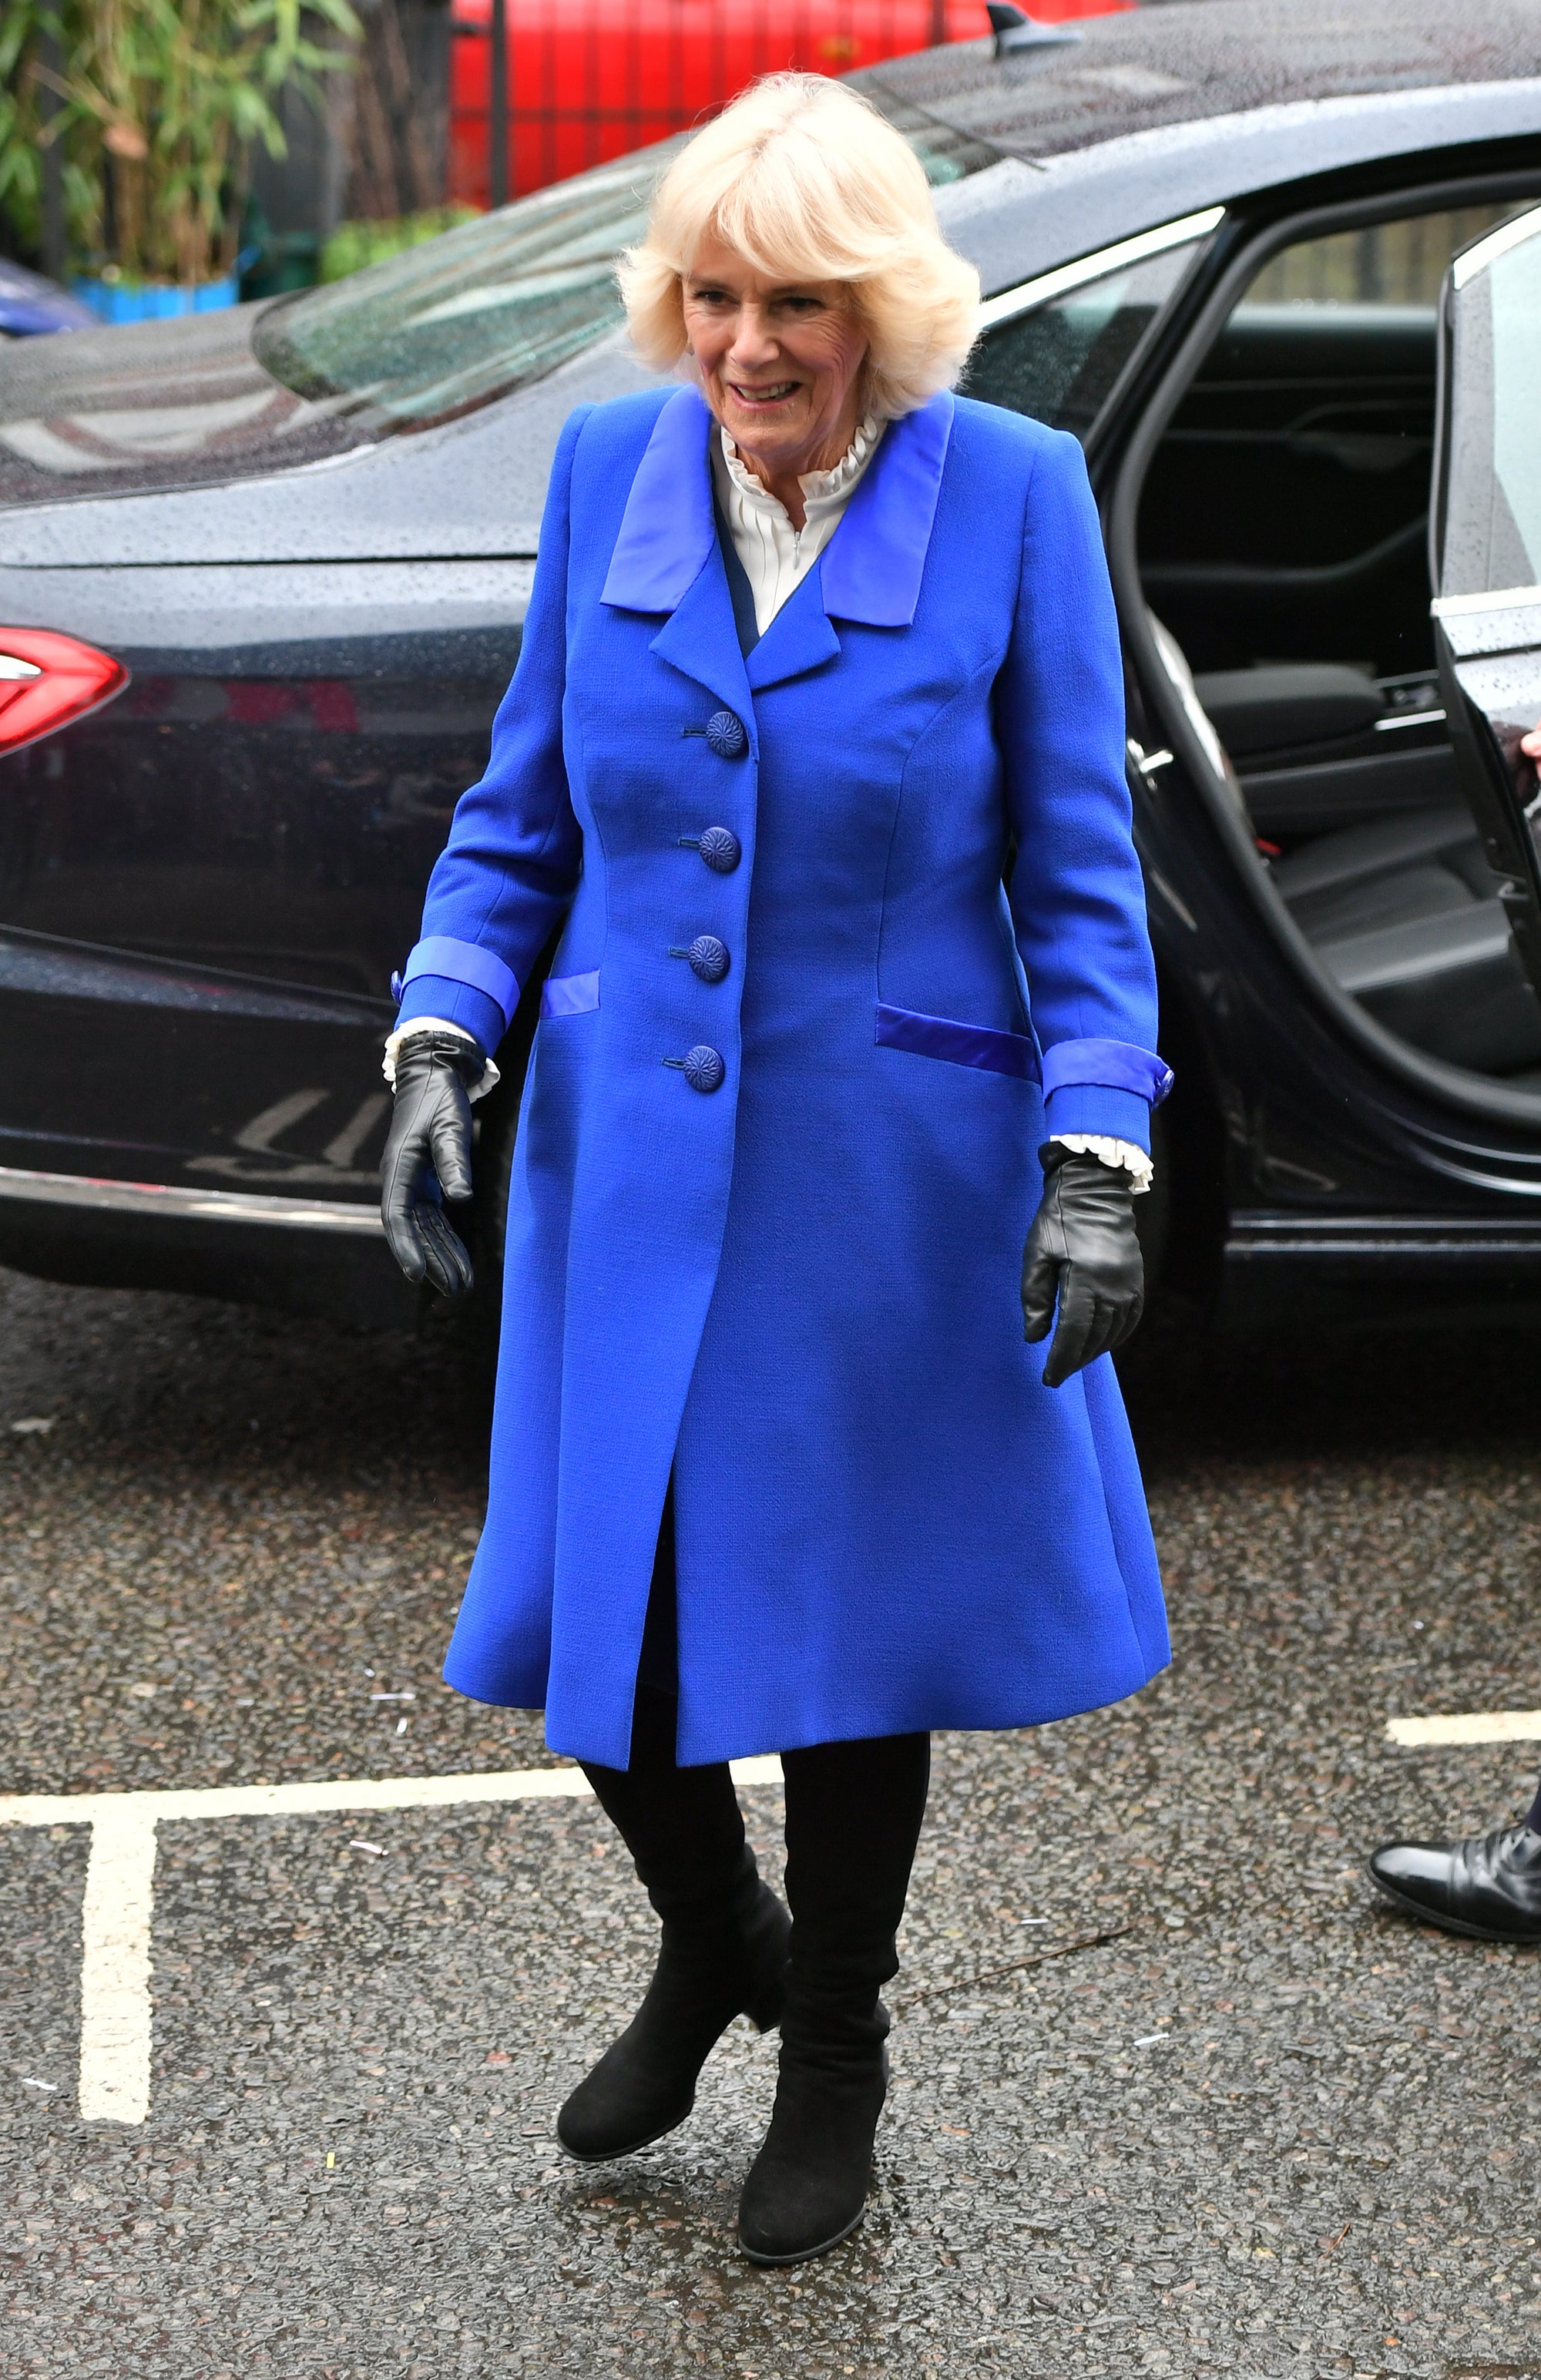 The Duchess of Cornwall arrives for a tour of the Kiln Theatre in 2020 (Dominic Lipinski/PA)